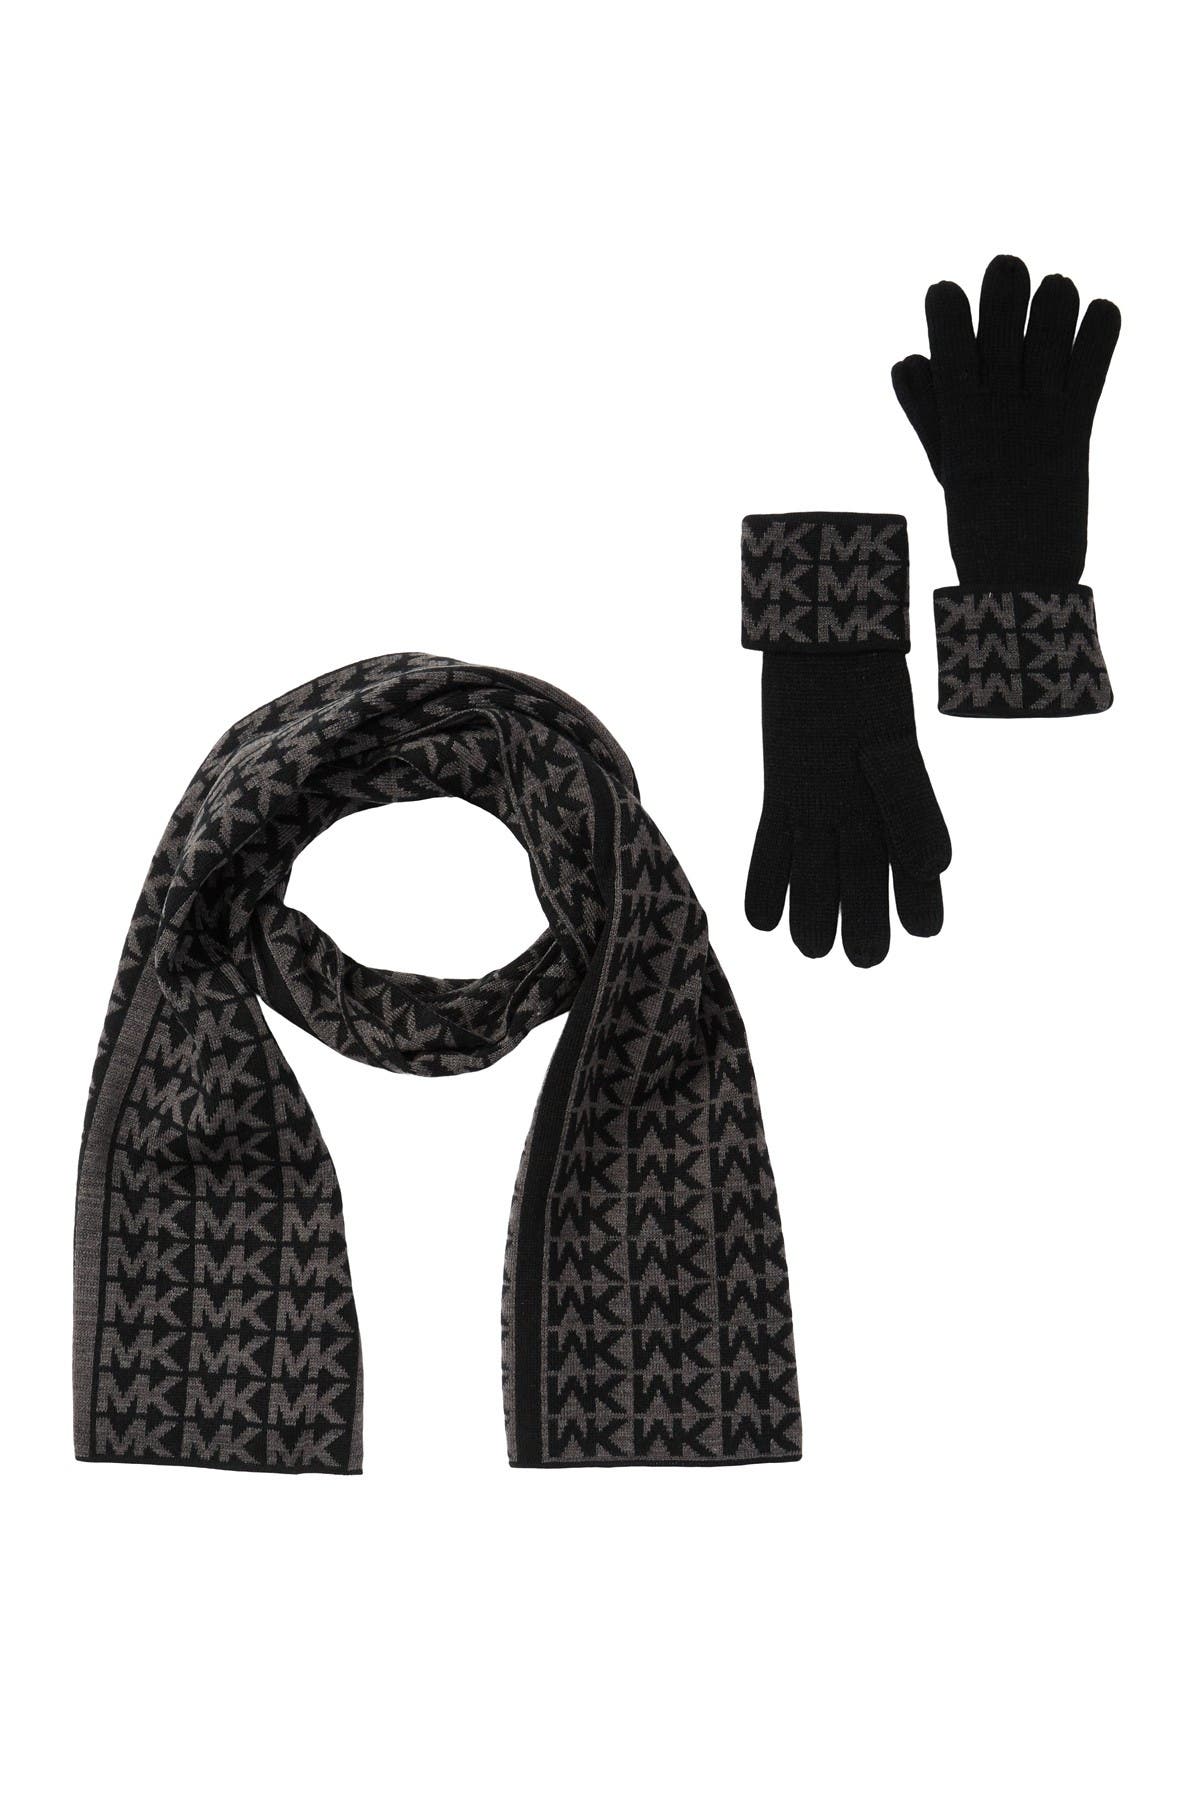 mk hat and scarf set